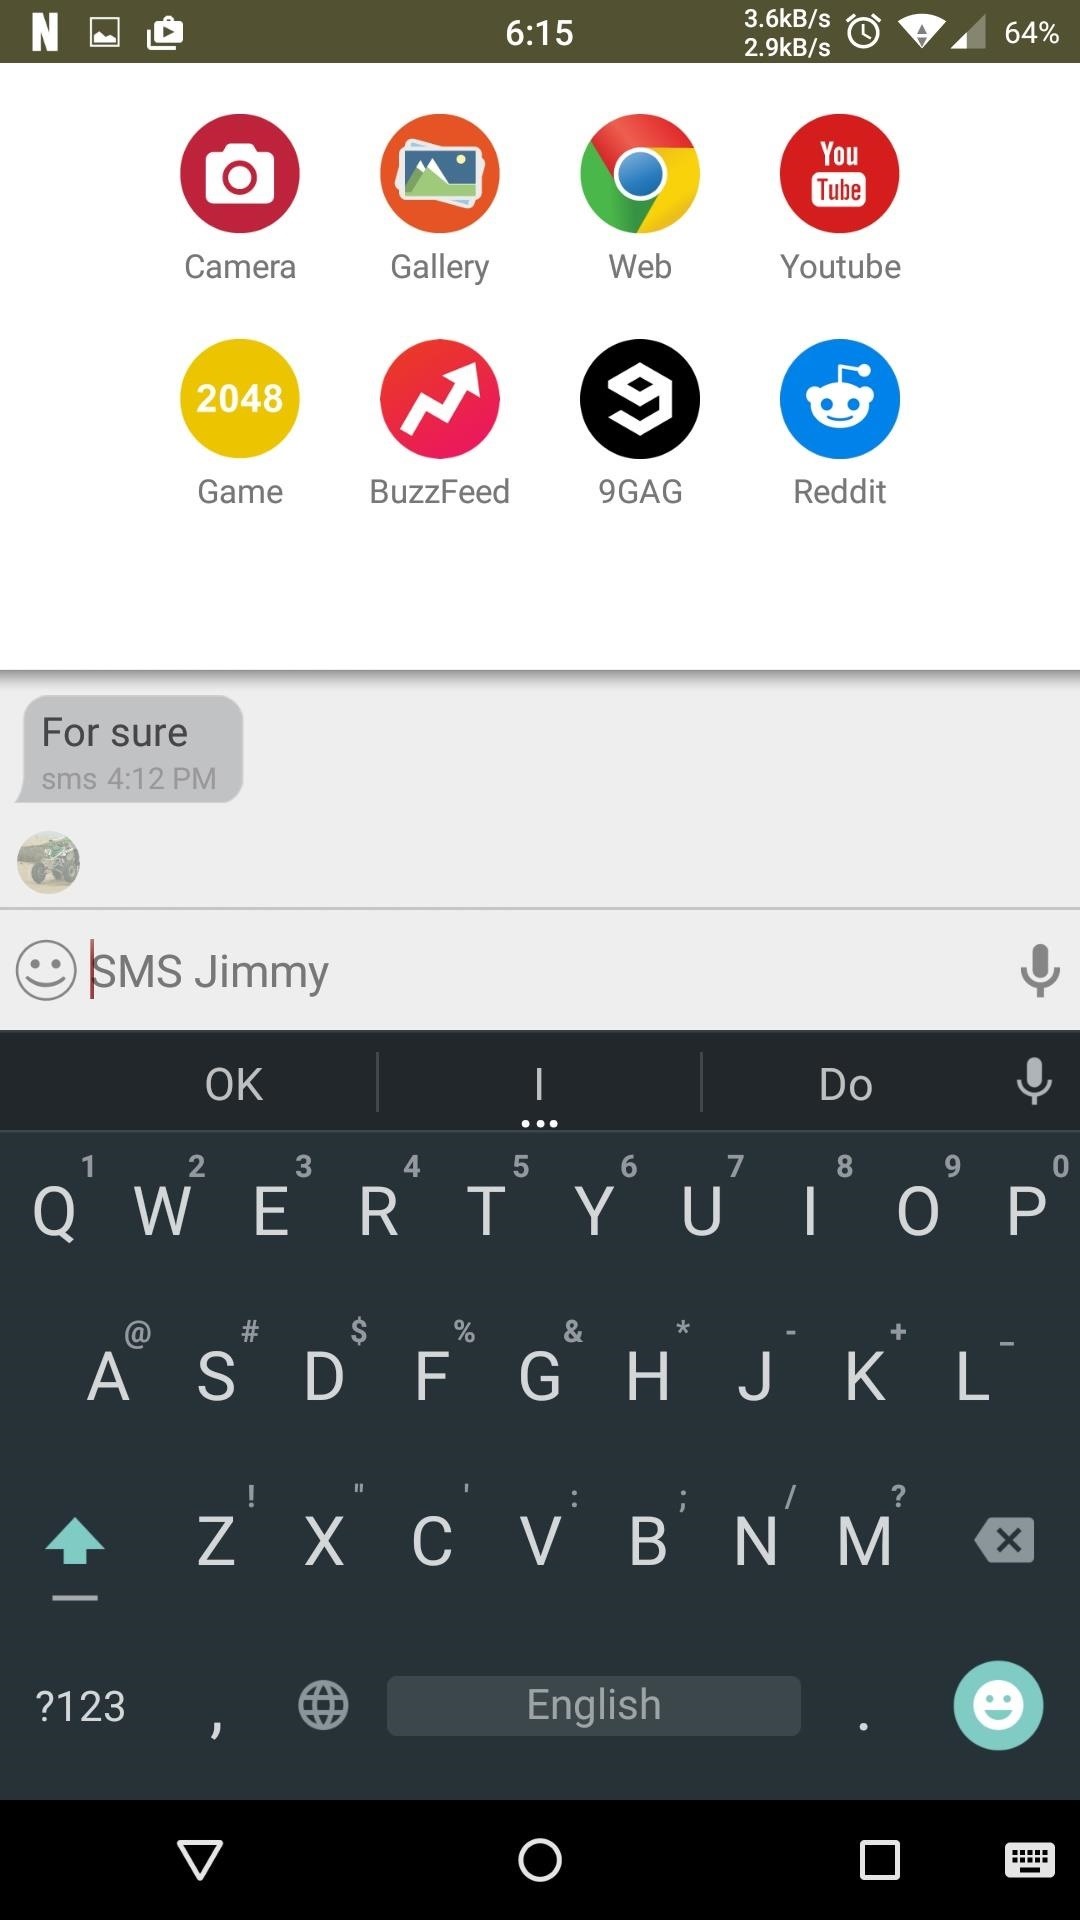 10 Free Texting Apps for Android That Are Way Better Than Your Stock SMS App